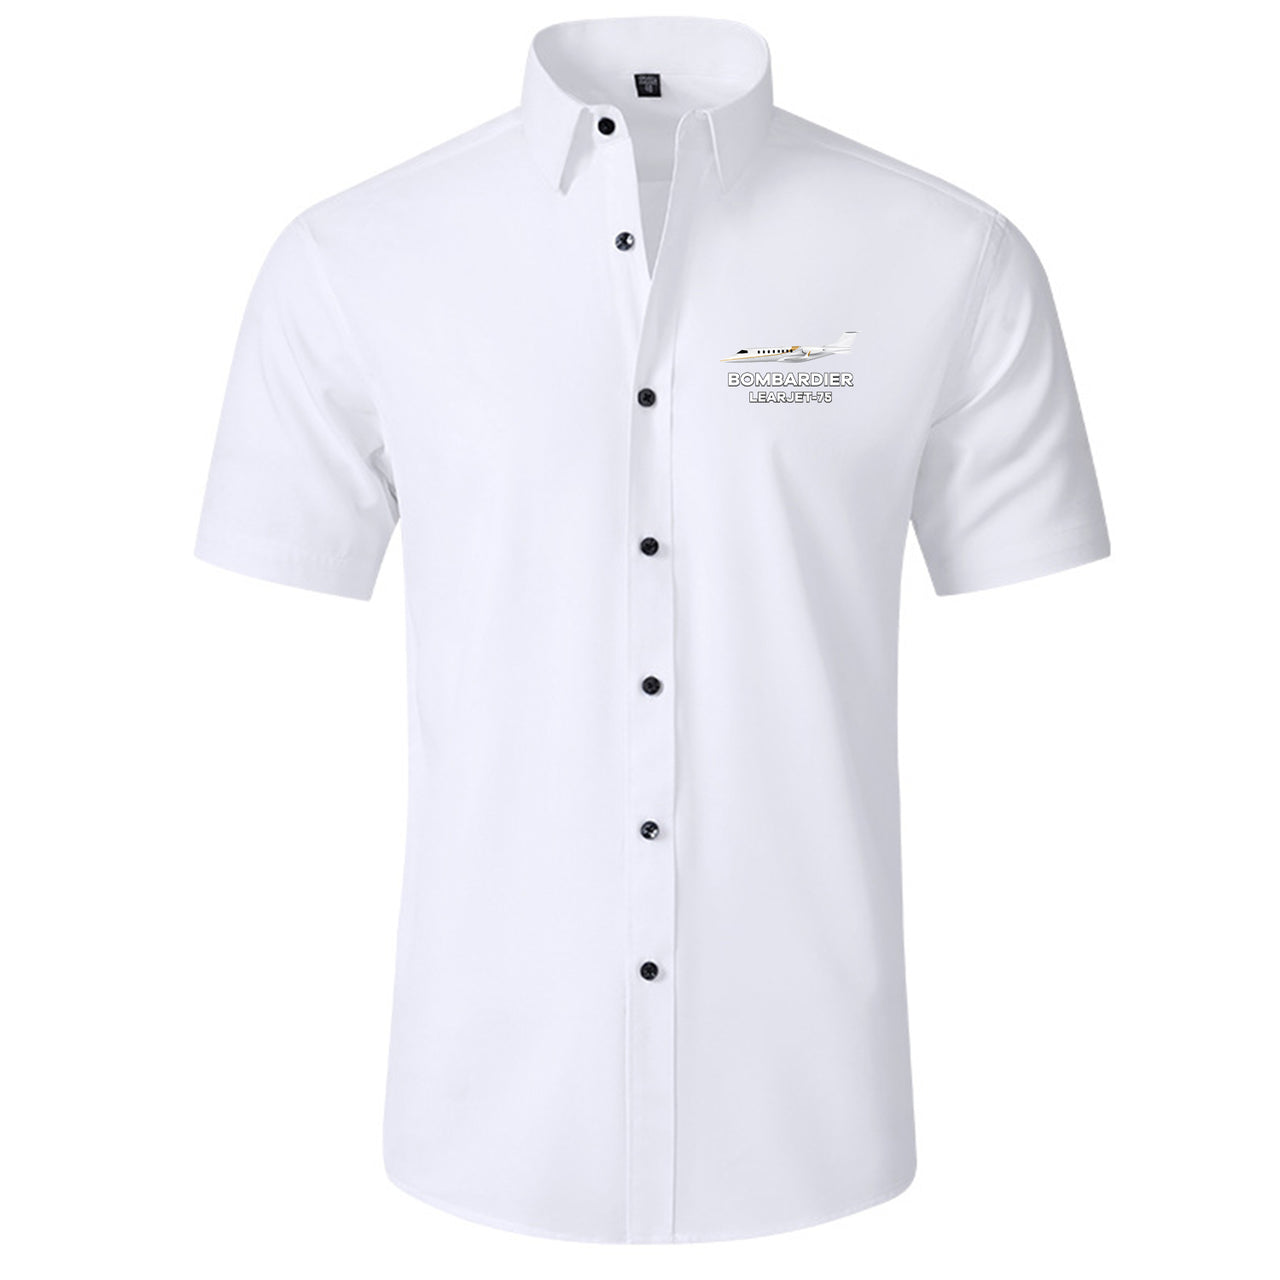 The Bombardier Learjet 75 Designed Short Sleeve Shirts